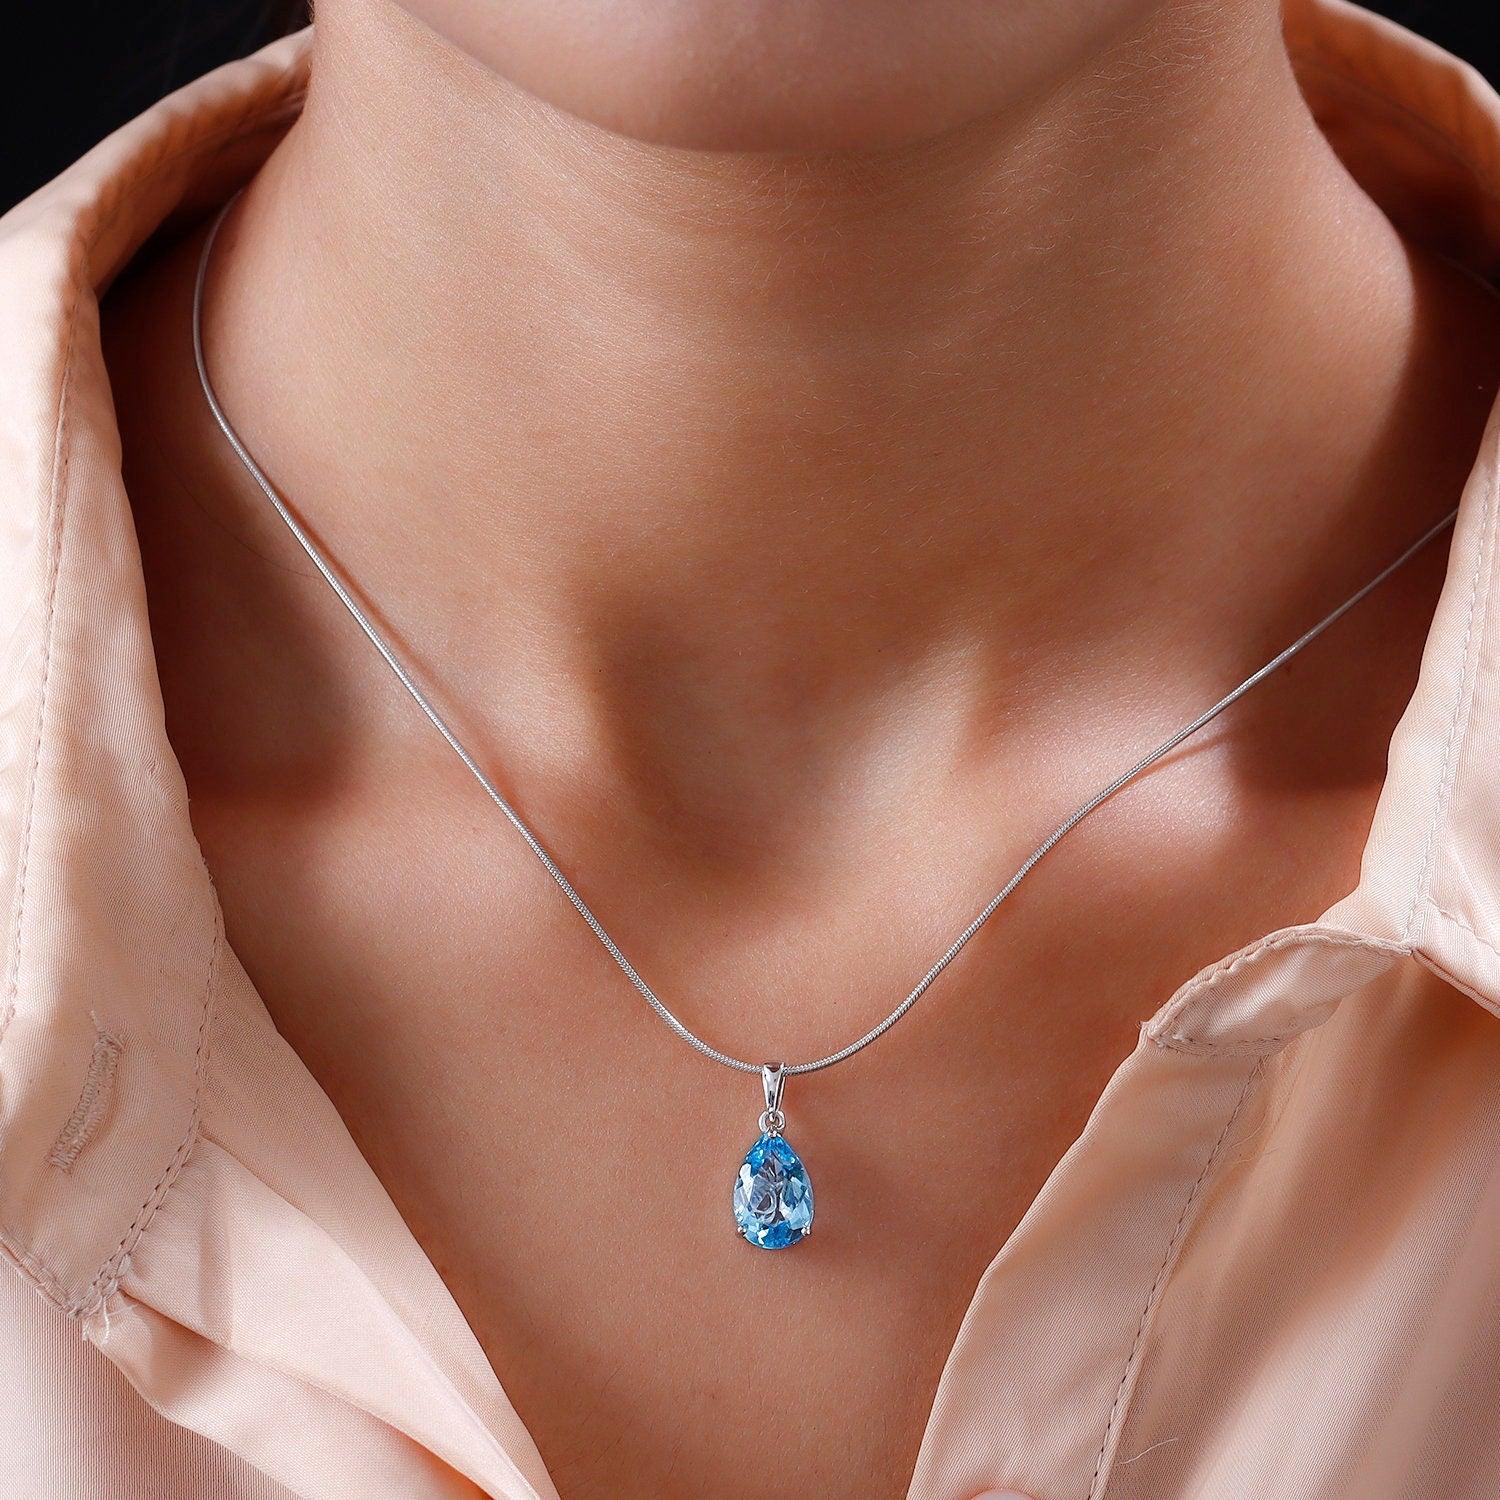 Genuine Blue Topaz Pendant, Solitaire Pendant, December Birthstone Necklace, 925 Sterling Silver, Blue Topaz Necklace, Gift for her - Inspiring Jewellery